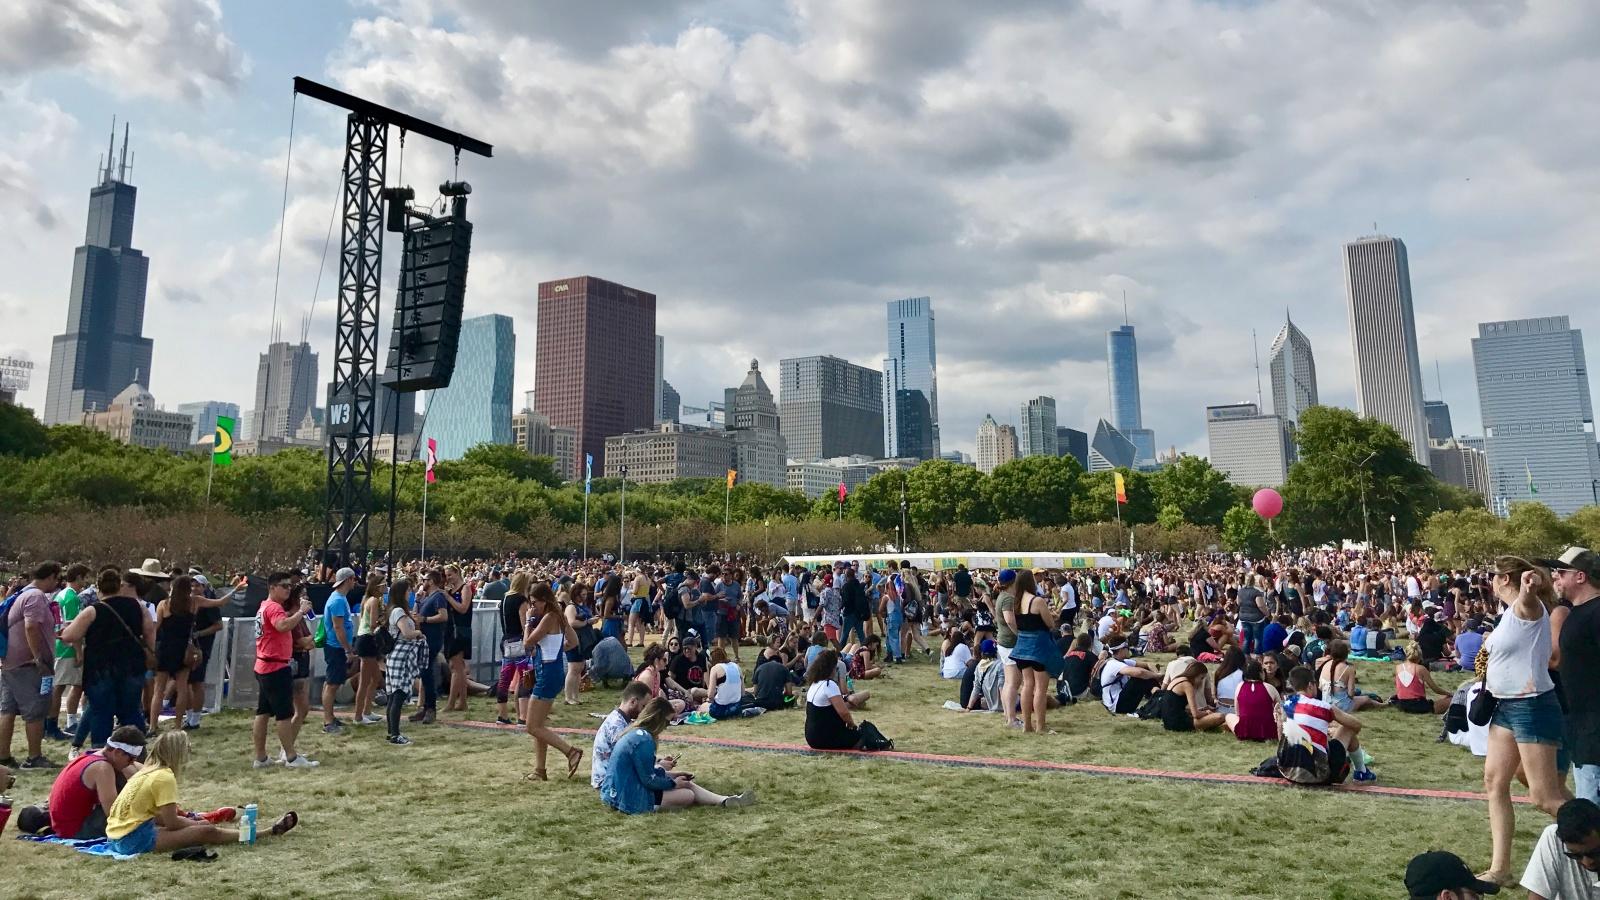 The Chicago skyline during Lollapalooza